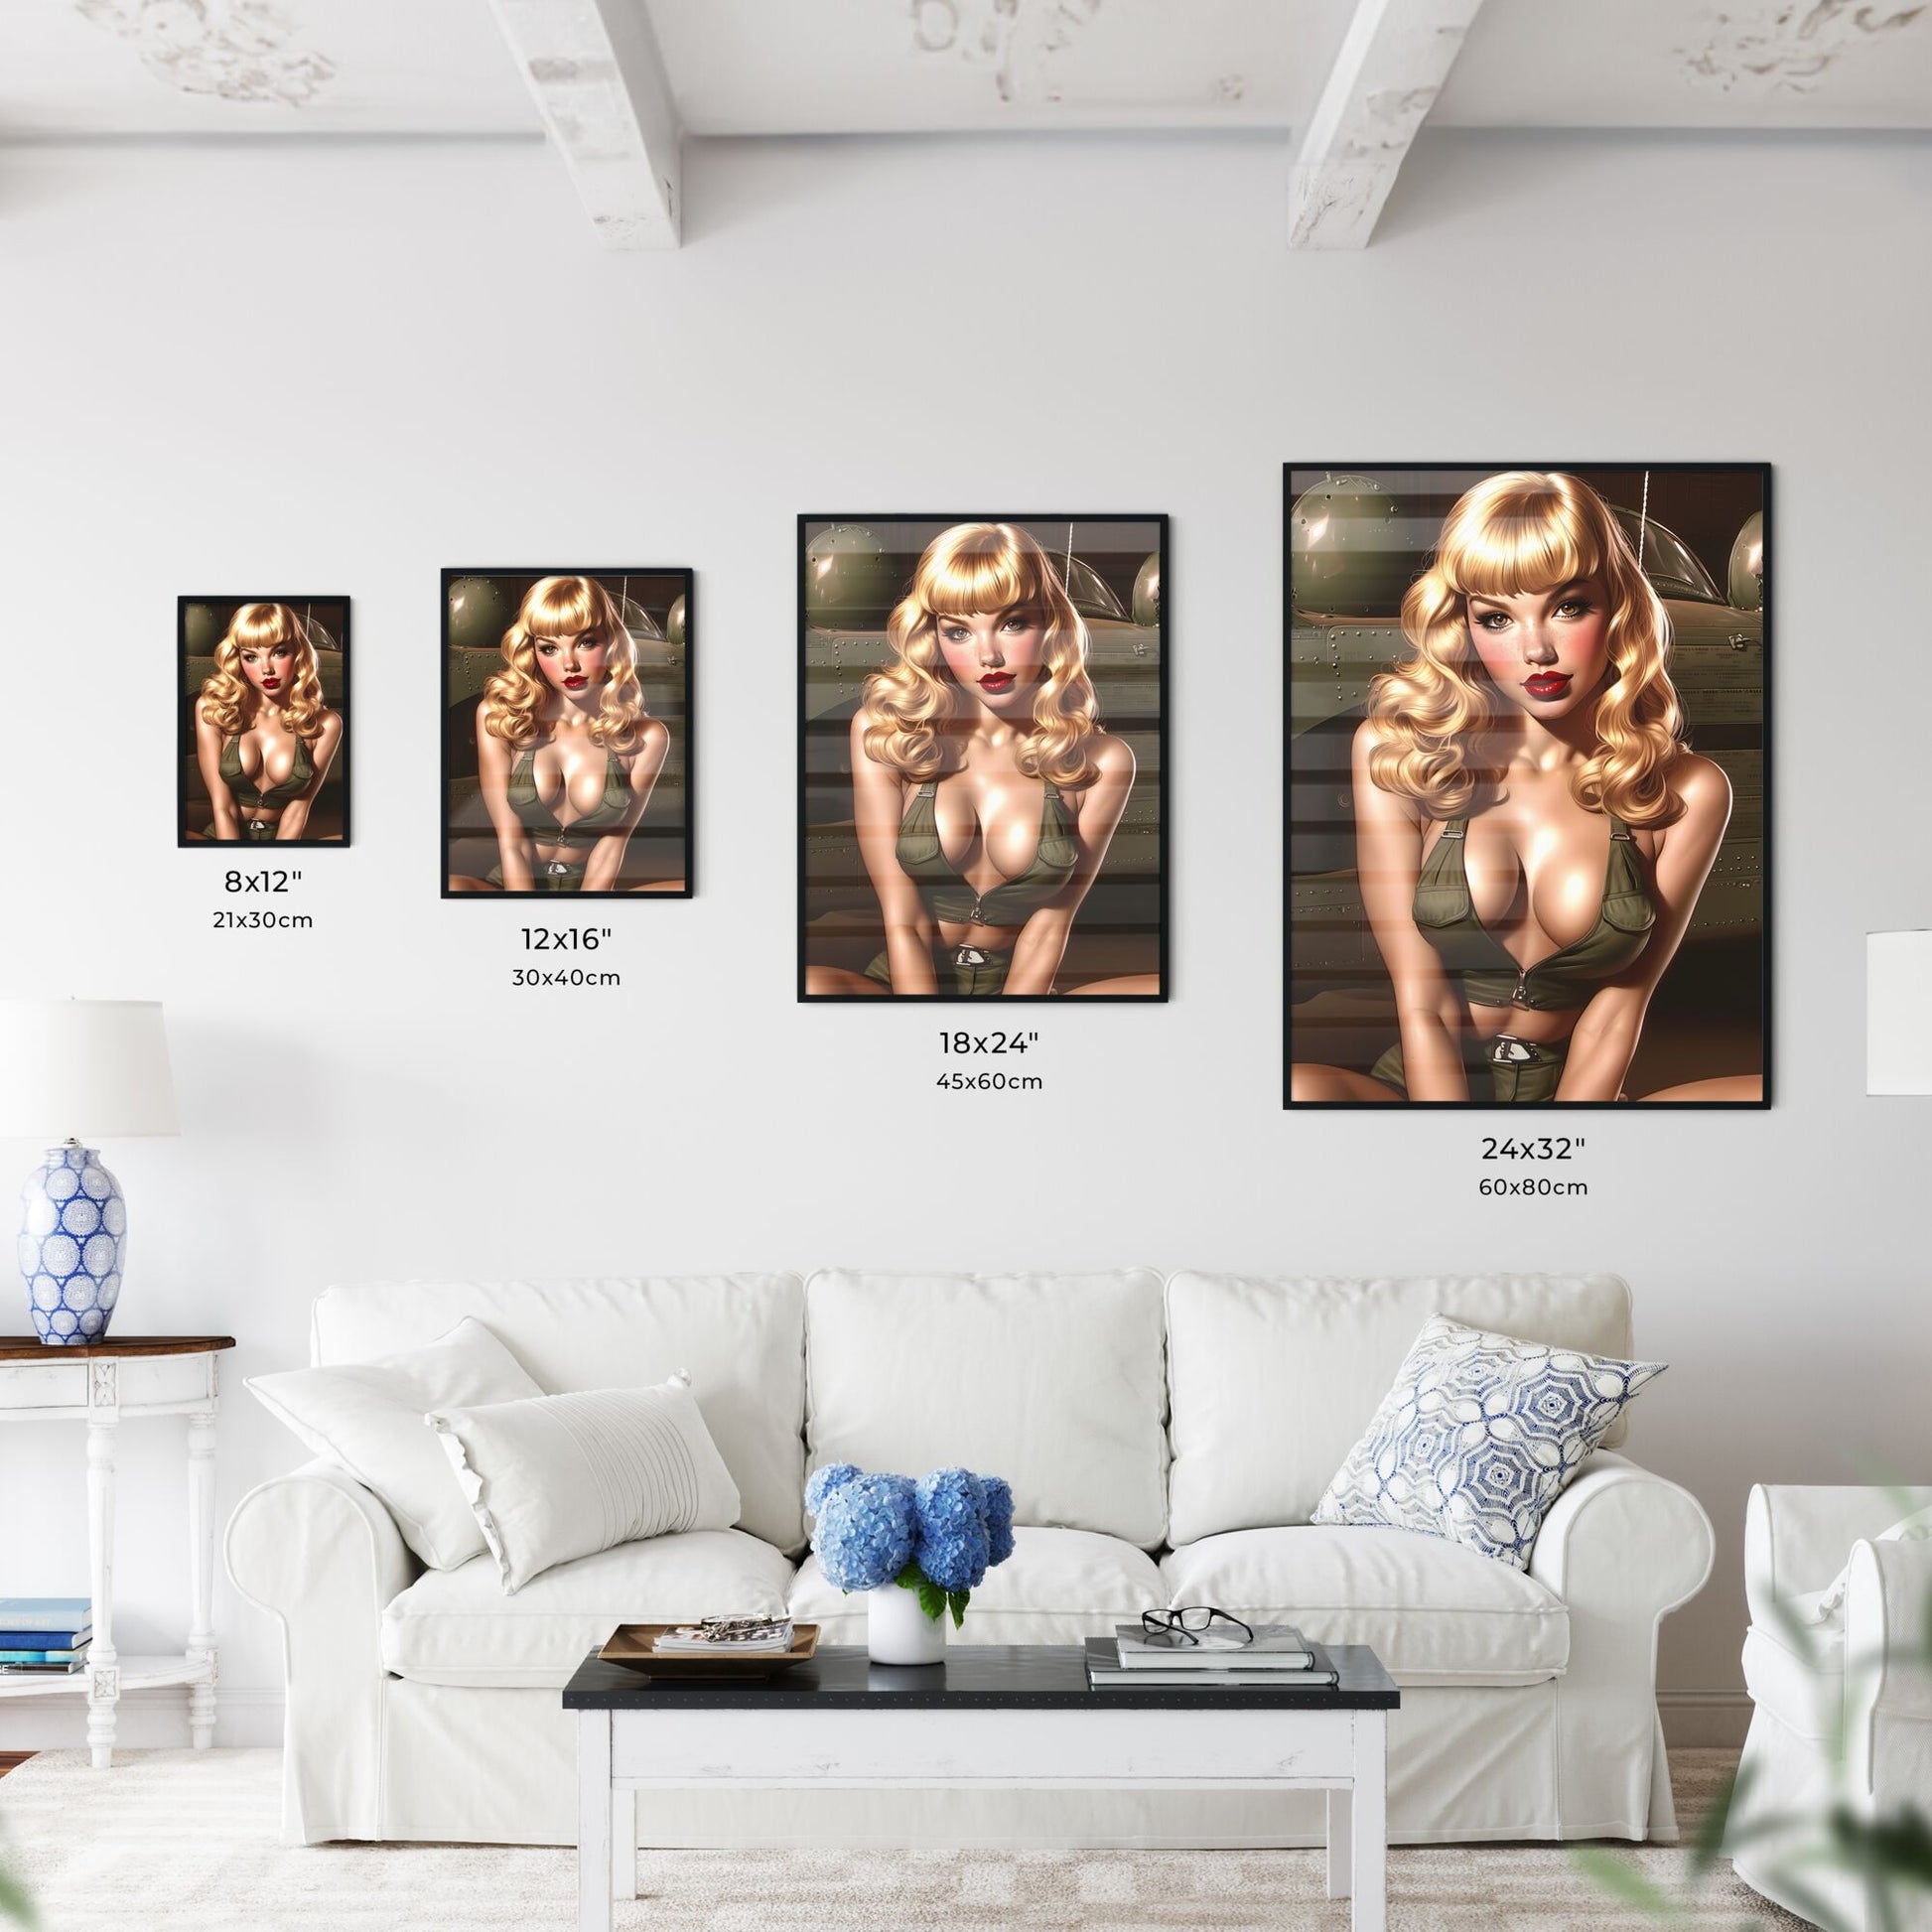 1950's pin up, has blond hair, red lipstick - Art print of a reception desk in a hotel lobby Default Title